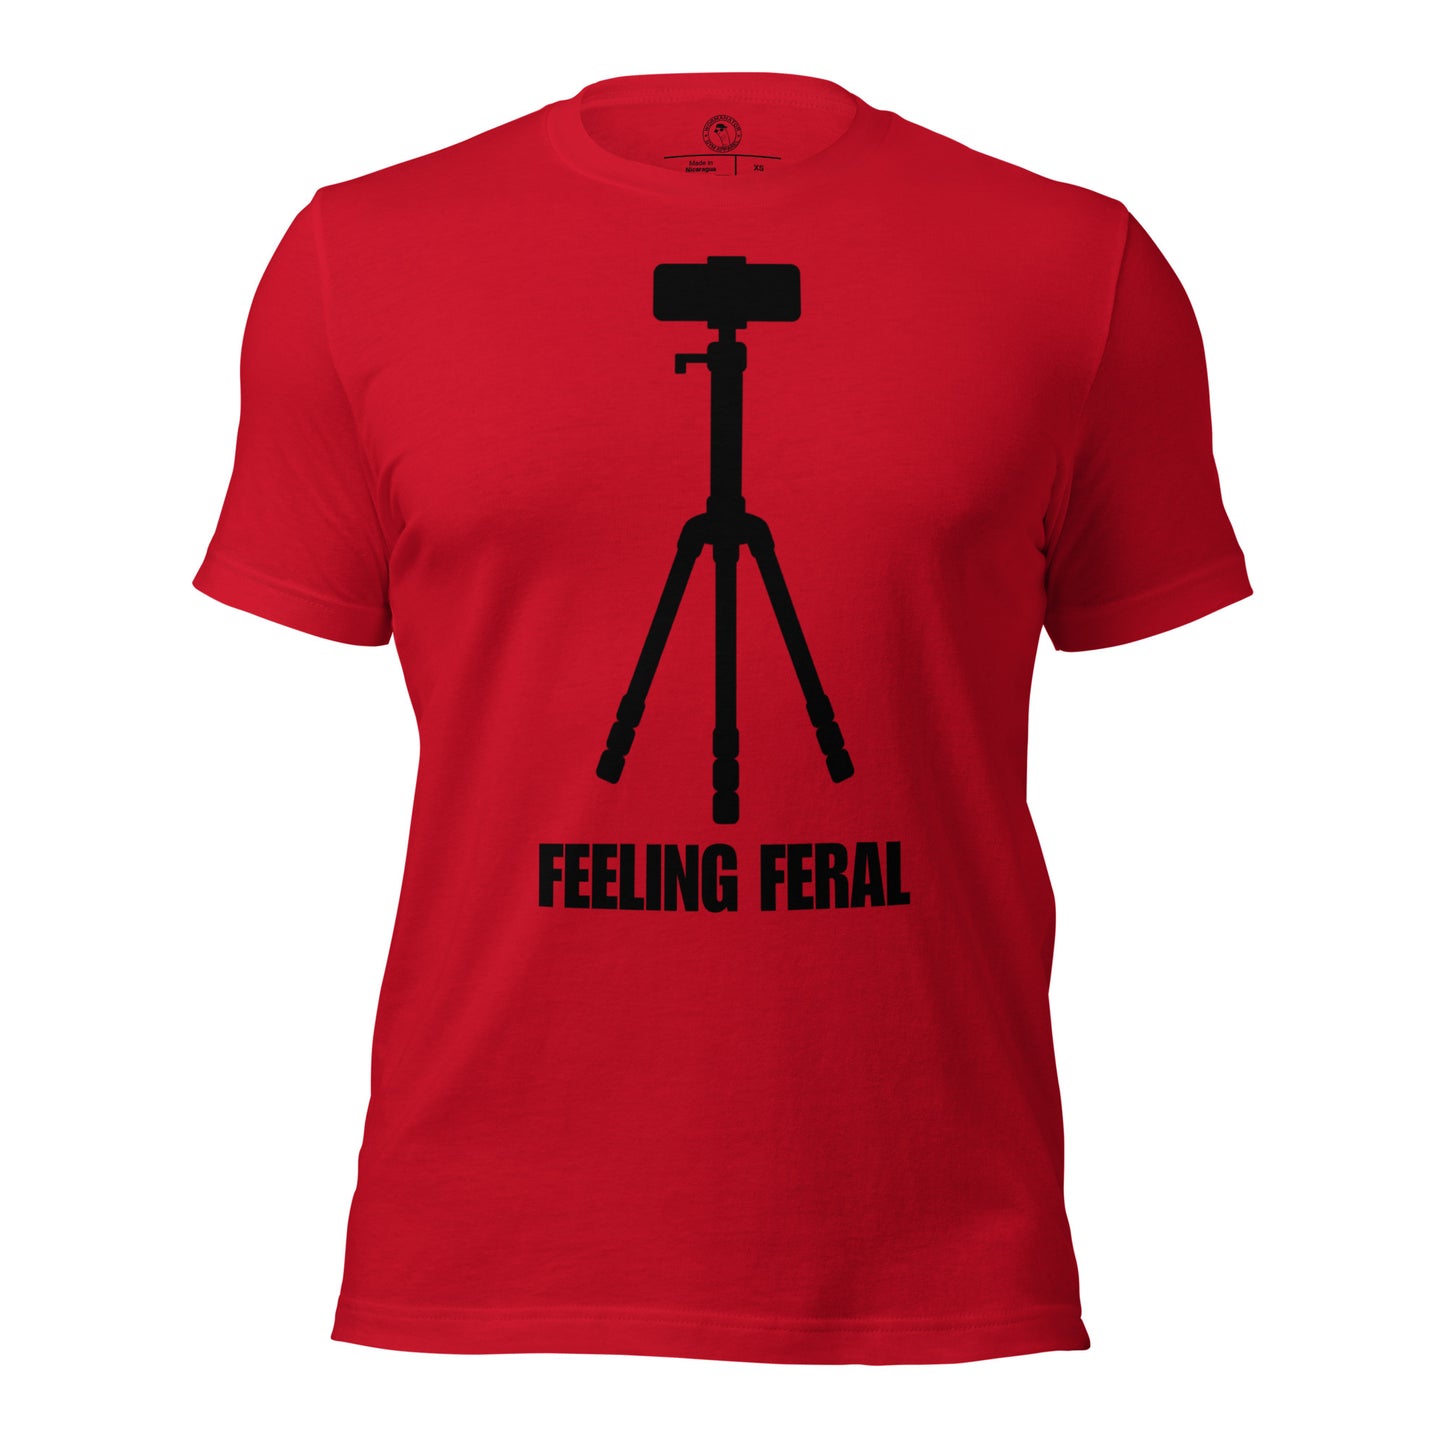 Feeling Feral Gym Shirt in Red